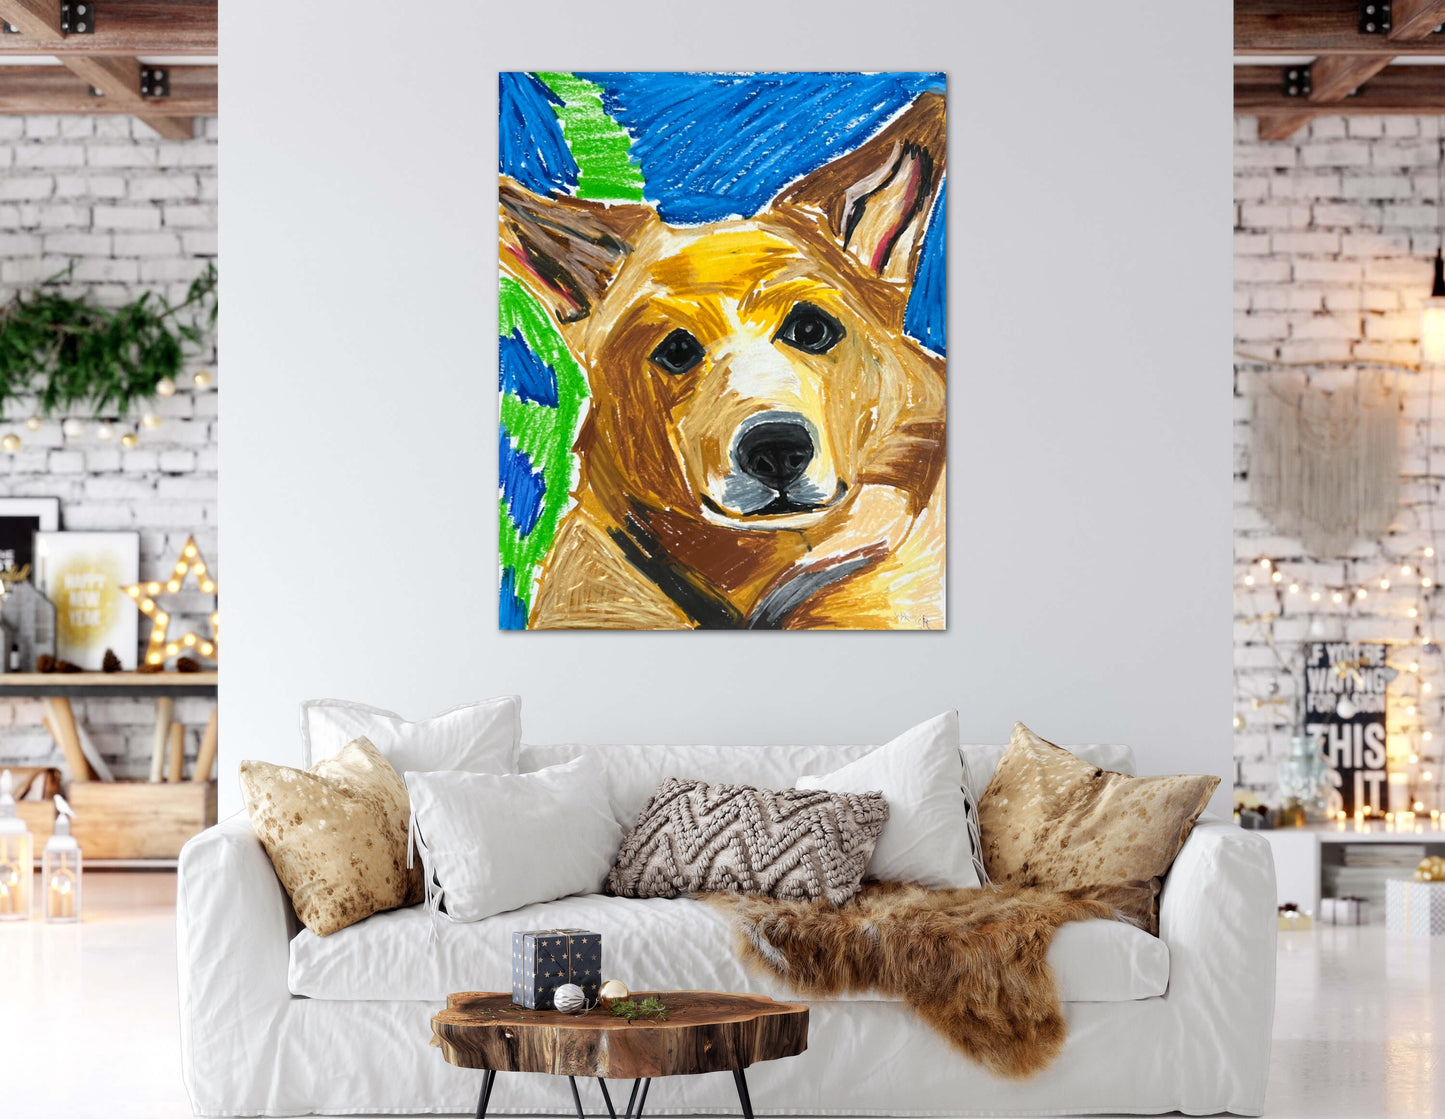 Archie The Corgi - Print, Poster, Stretched Canvas Print